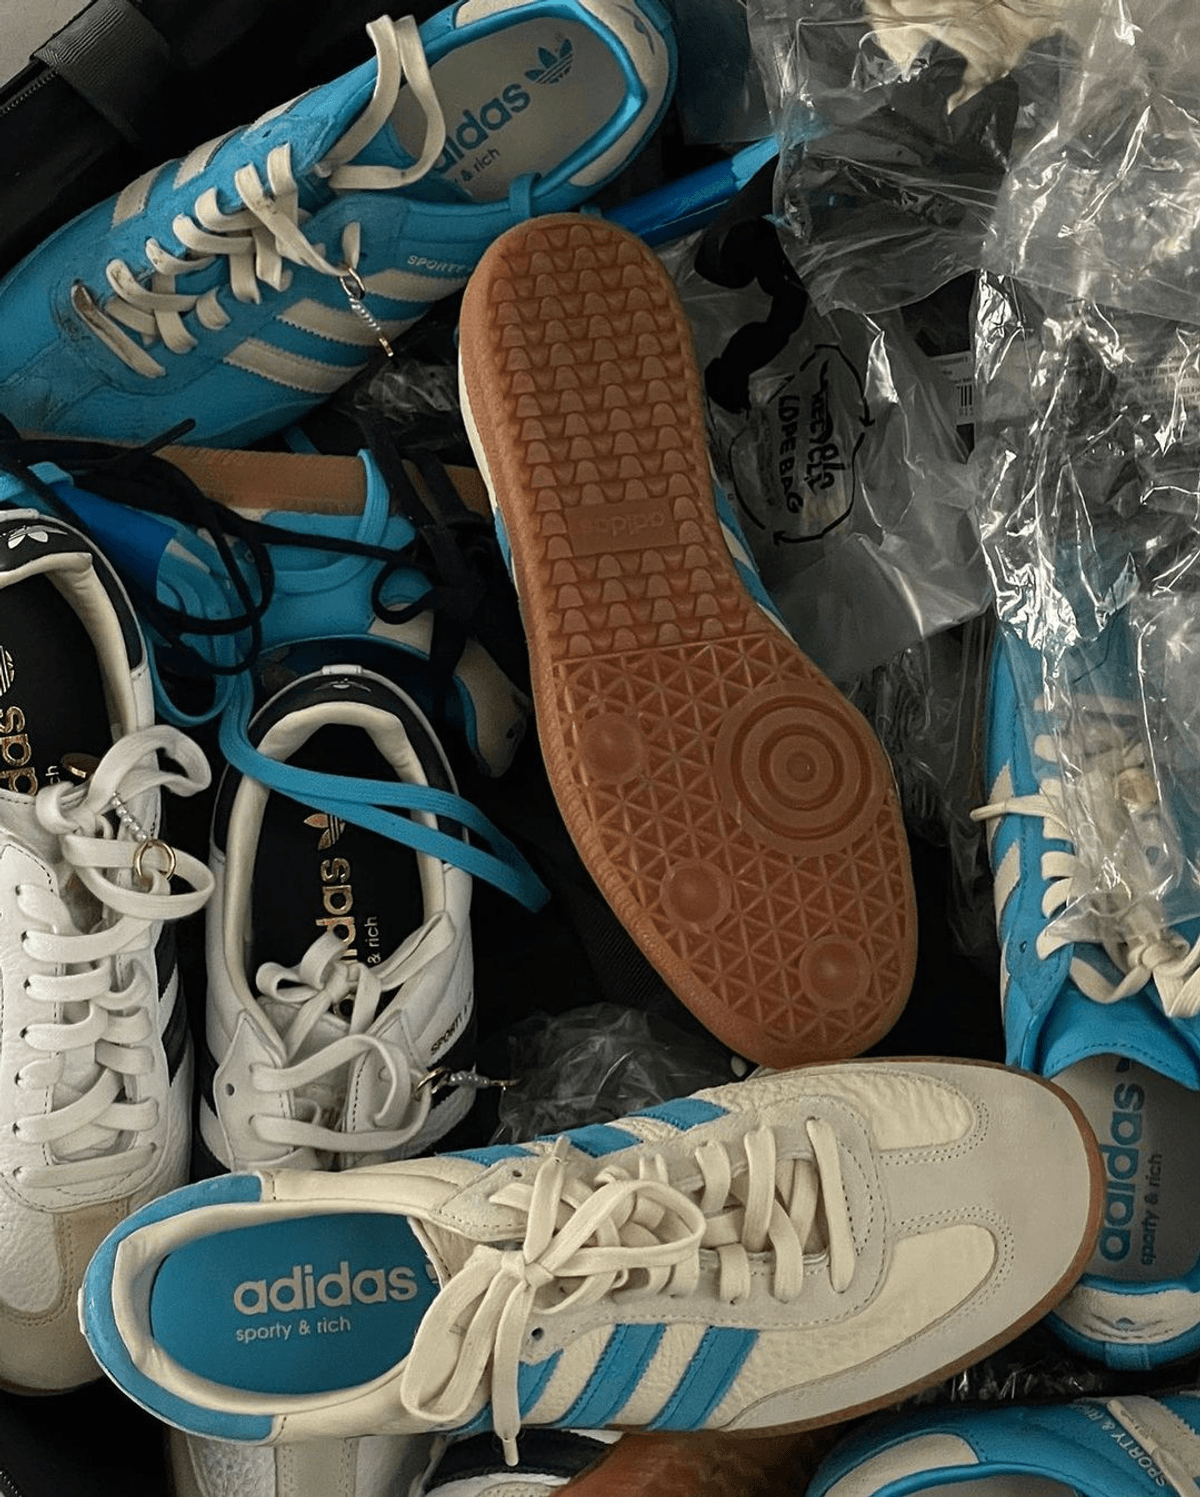 Sporty and Rich Return With 3 New Adidas Samba OG Colorways